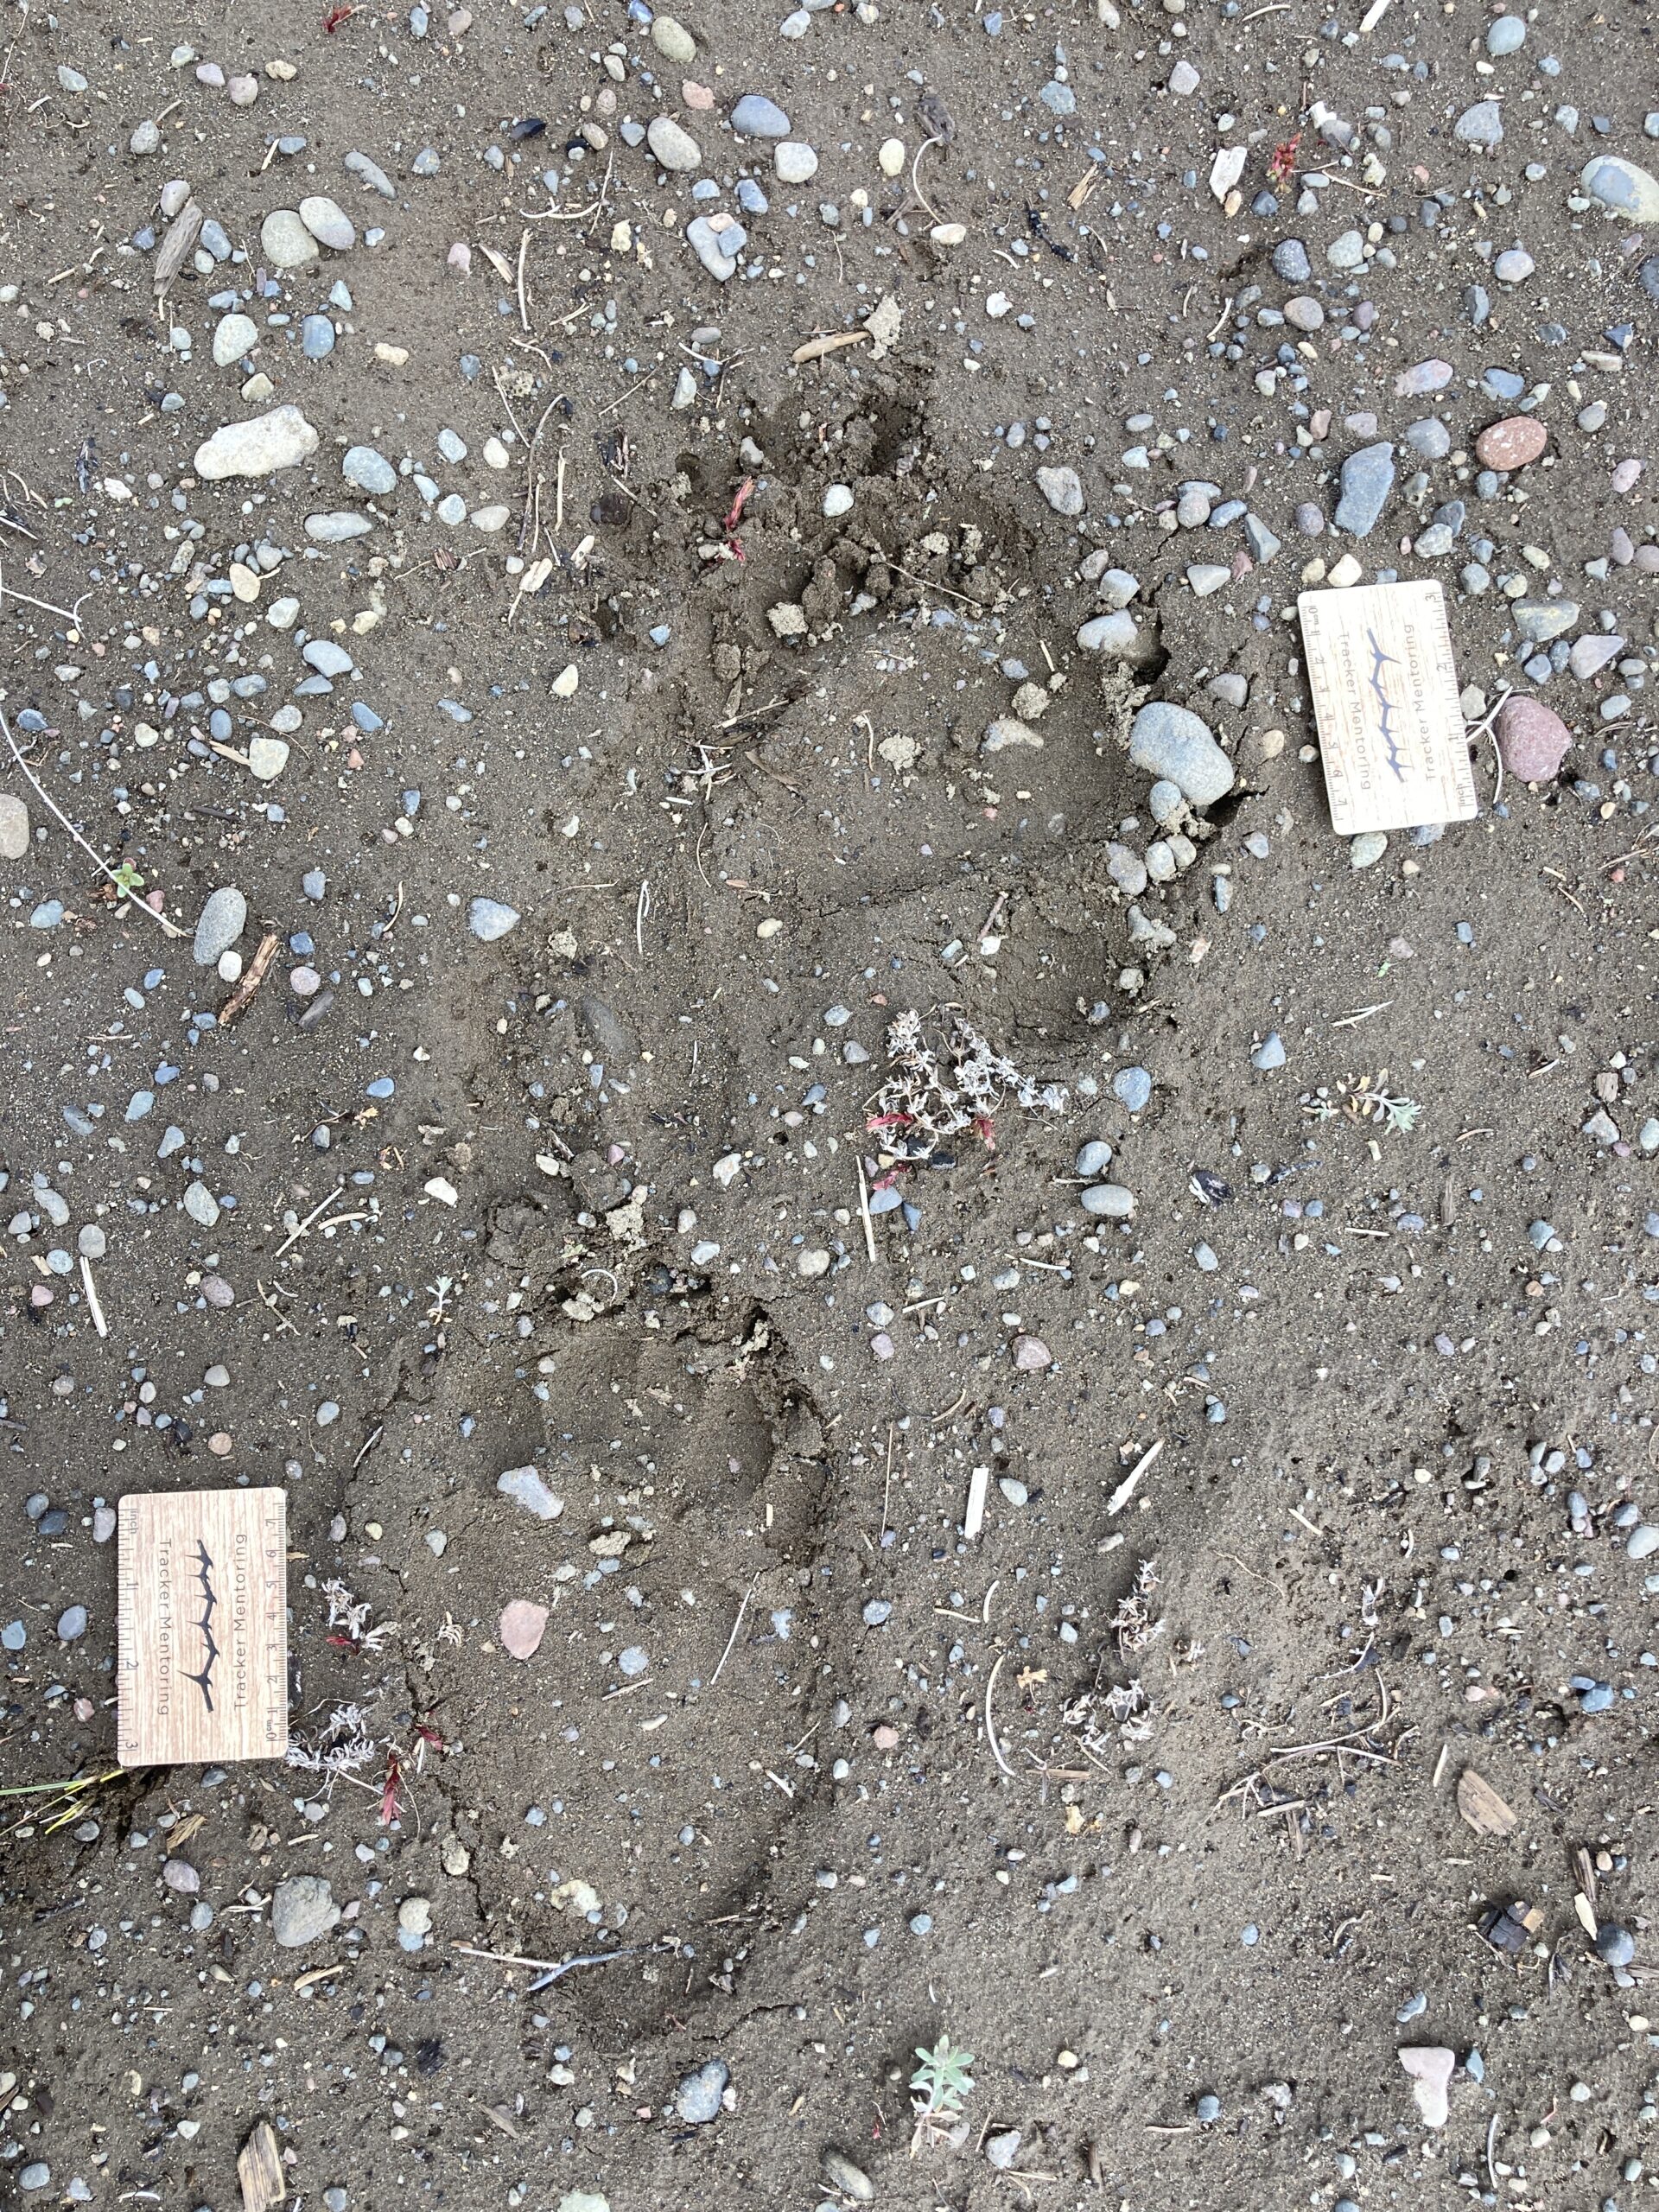 Grizzly bear tracks, Yellowstone, North America, August 2023 quiz